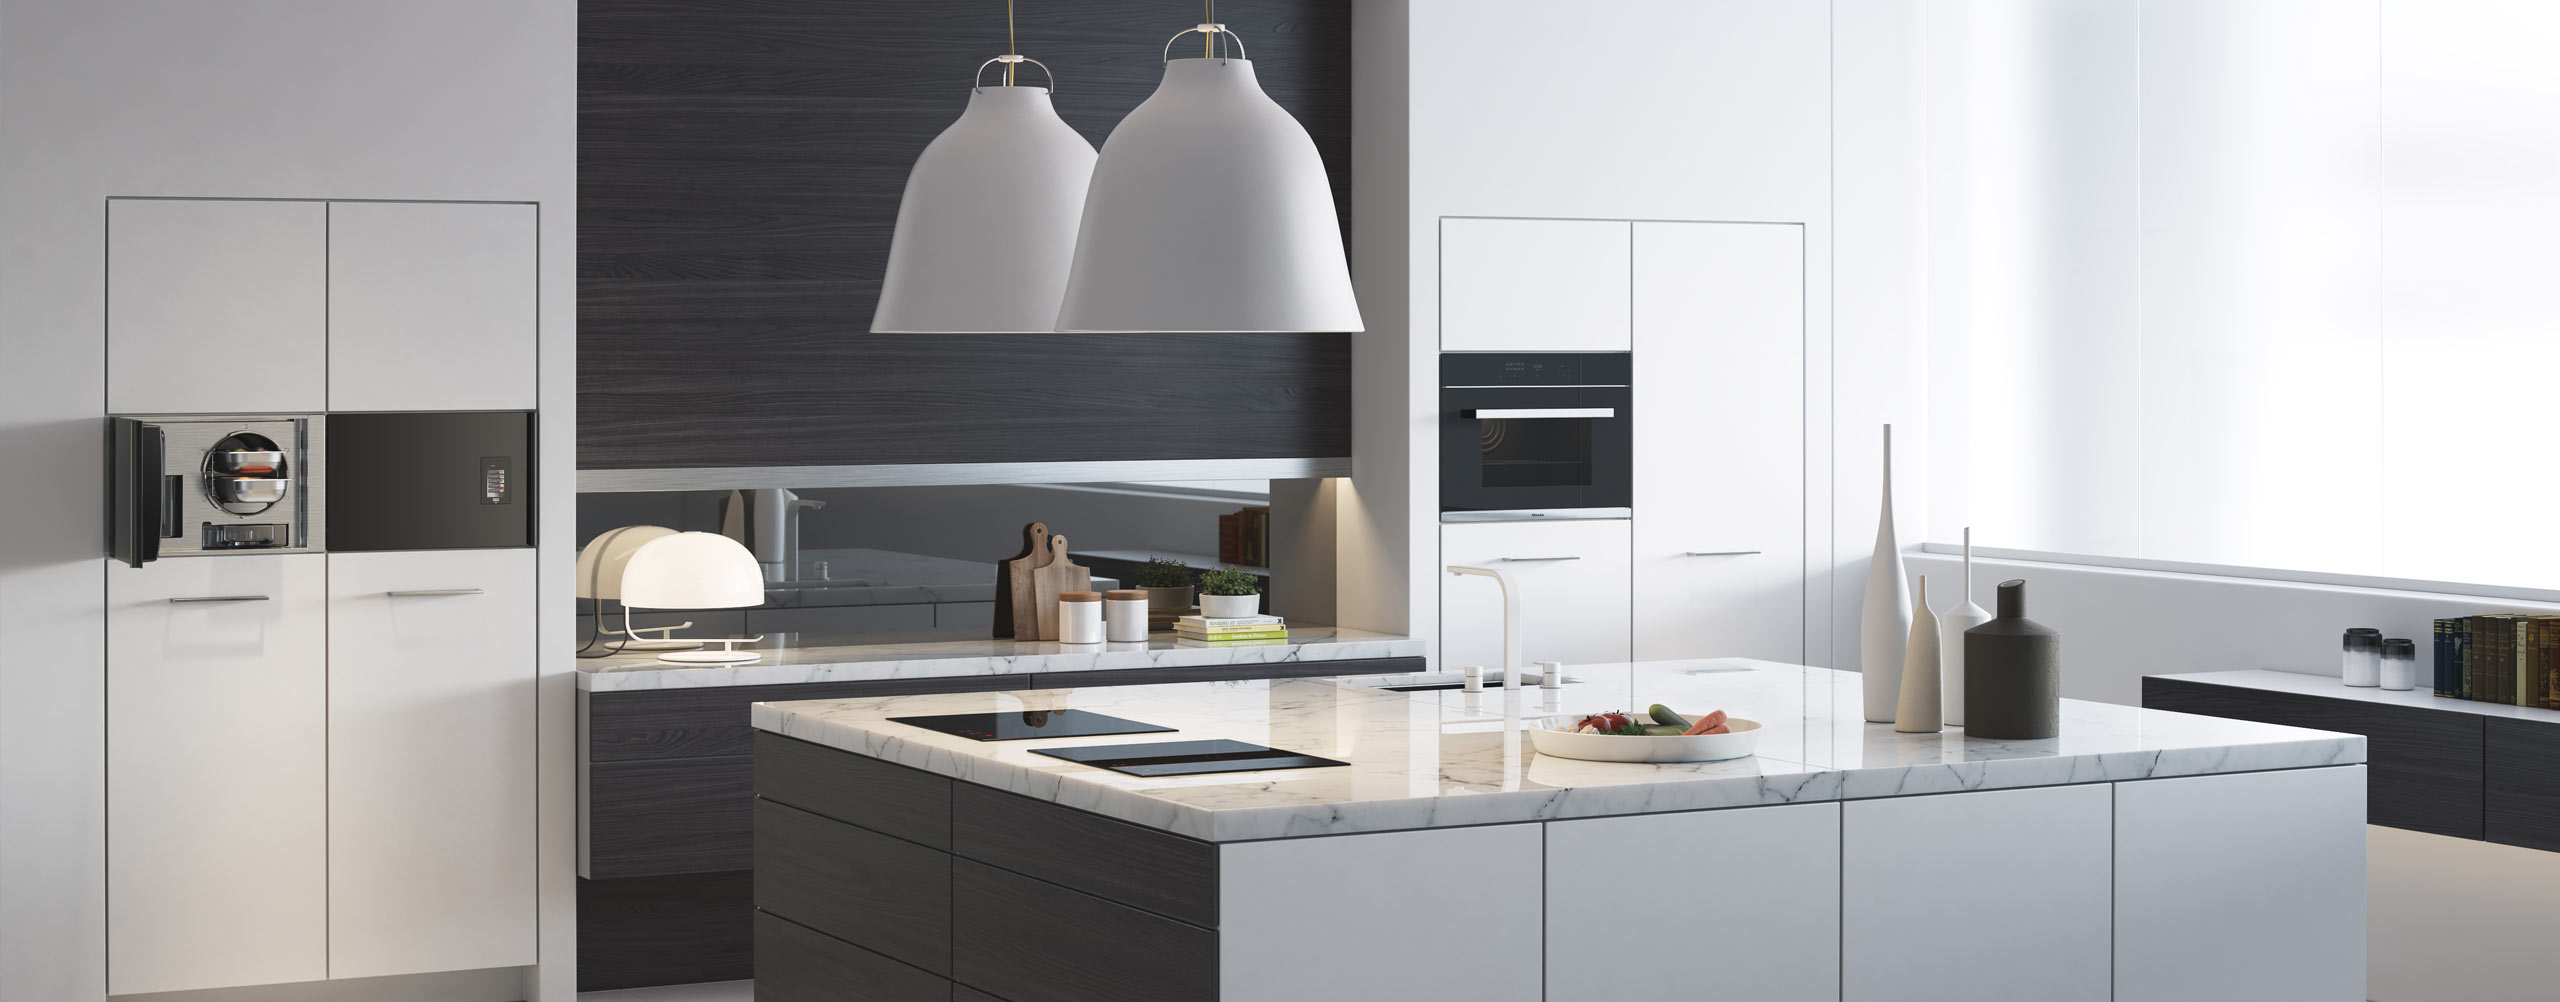 Full CGI scene created by Design Connected to showcase Kuhn Rikon kitchen accessories